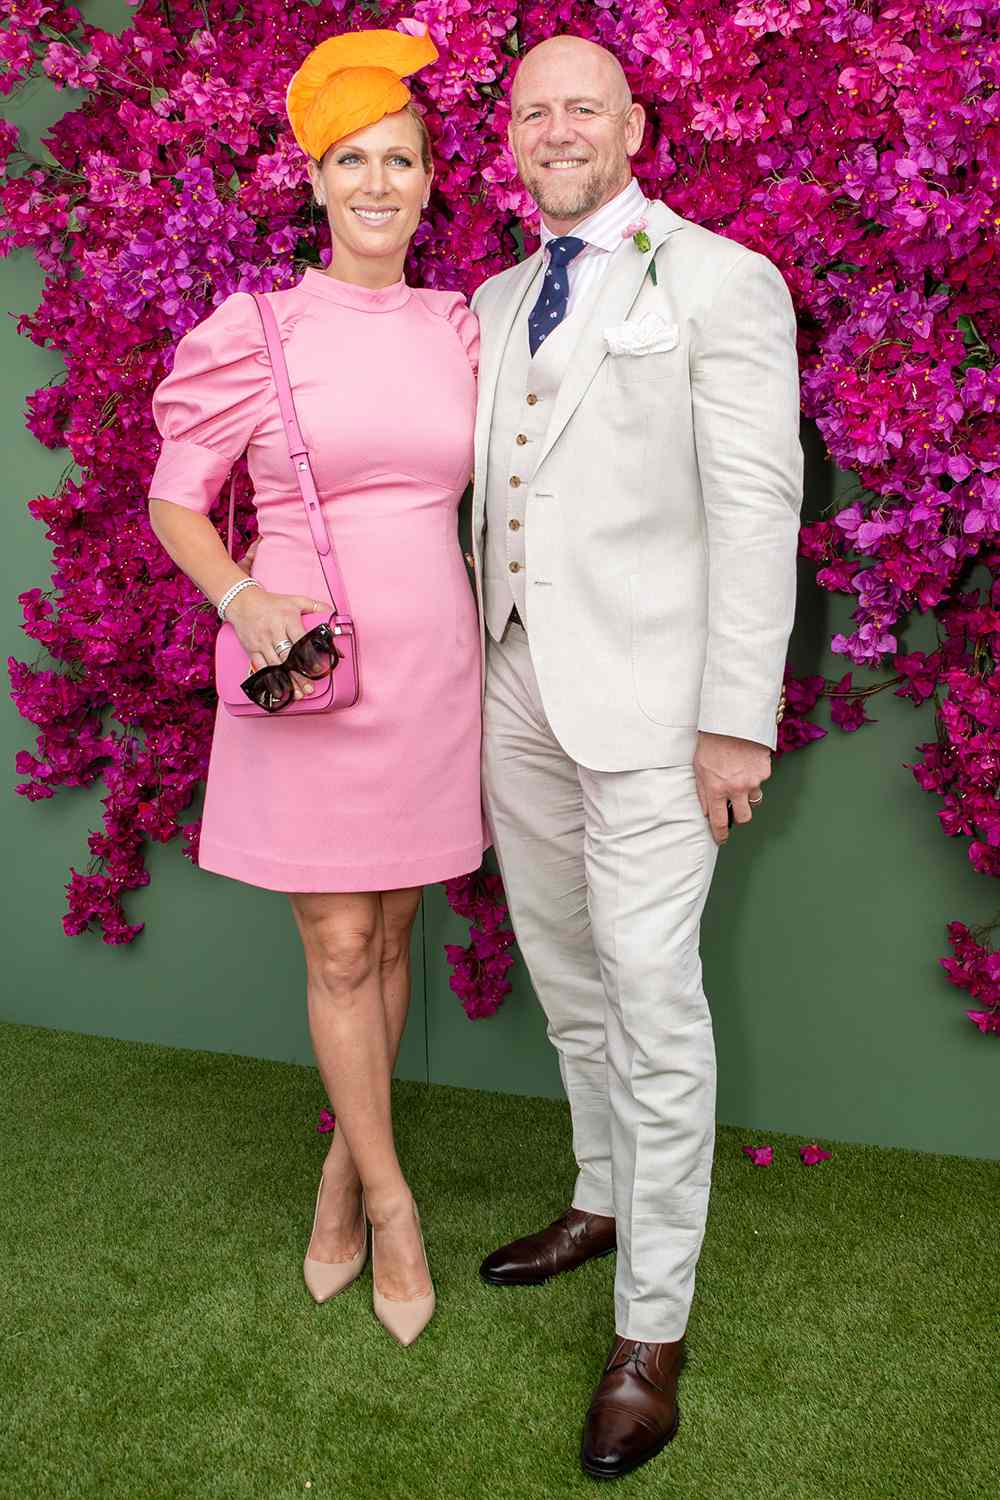 Zara Phillips and Mike Tindall attend the Moet Marquee Magic Millions Raceday at the Gold Coast Turf Club on January 11, 2020 in Gold Coast, Australia